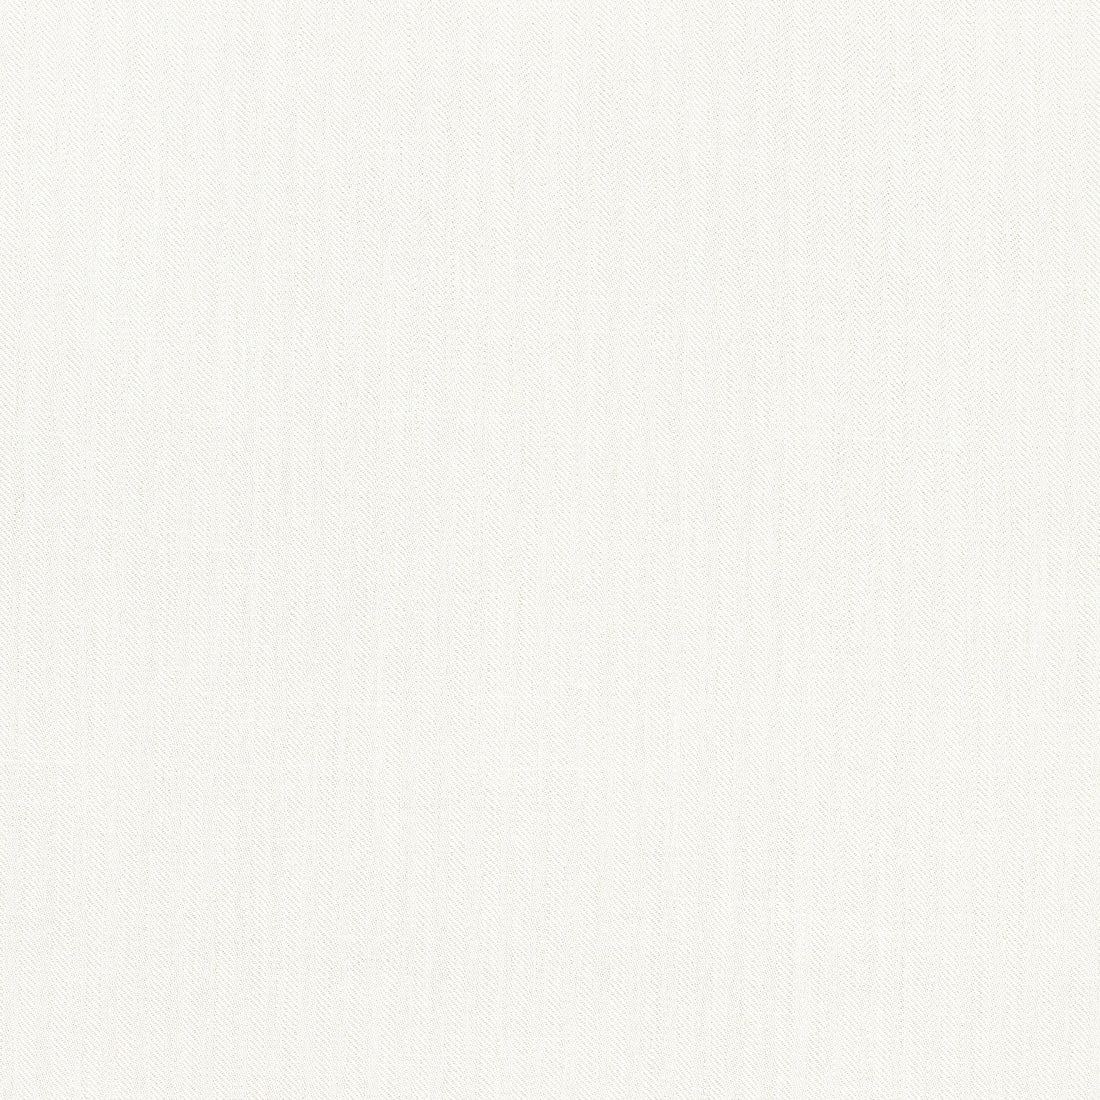 Highland fabric in ivory color - pattern number FWW7142 - by Thibaut in the Atmosphere collection